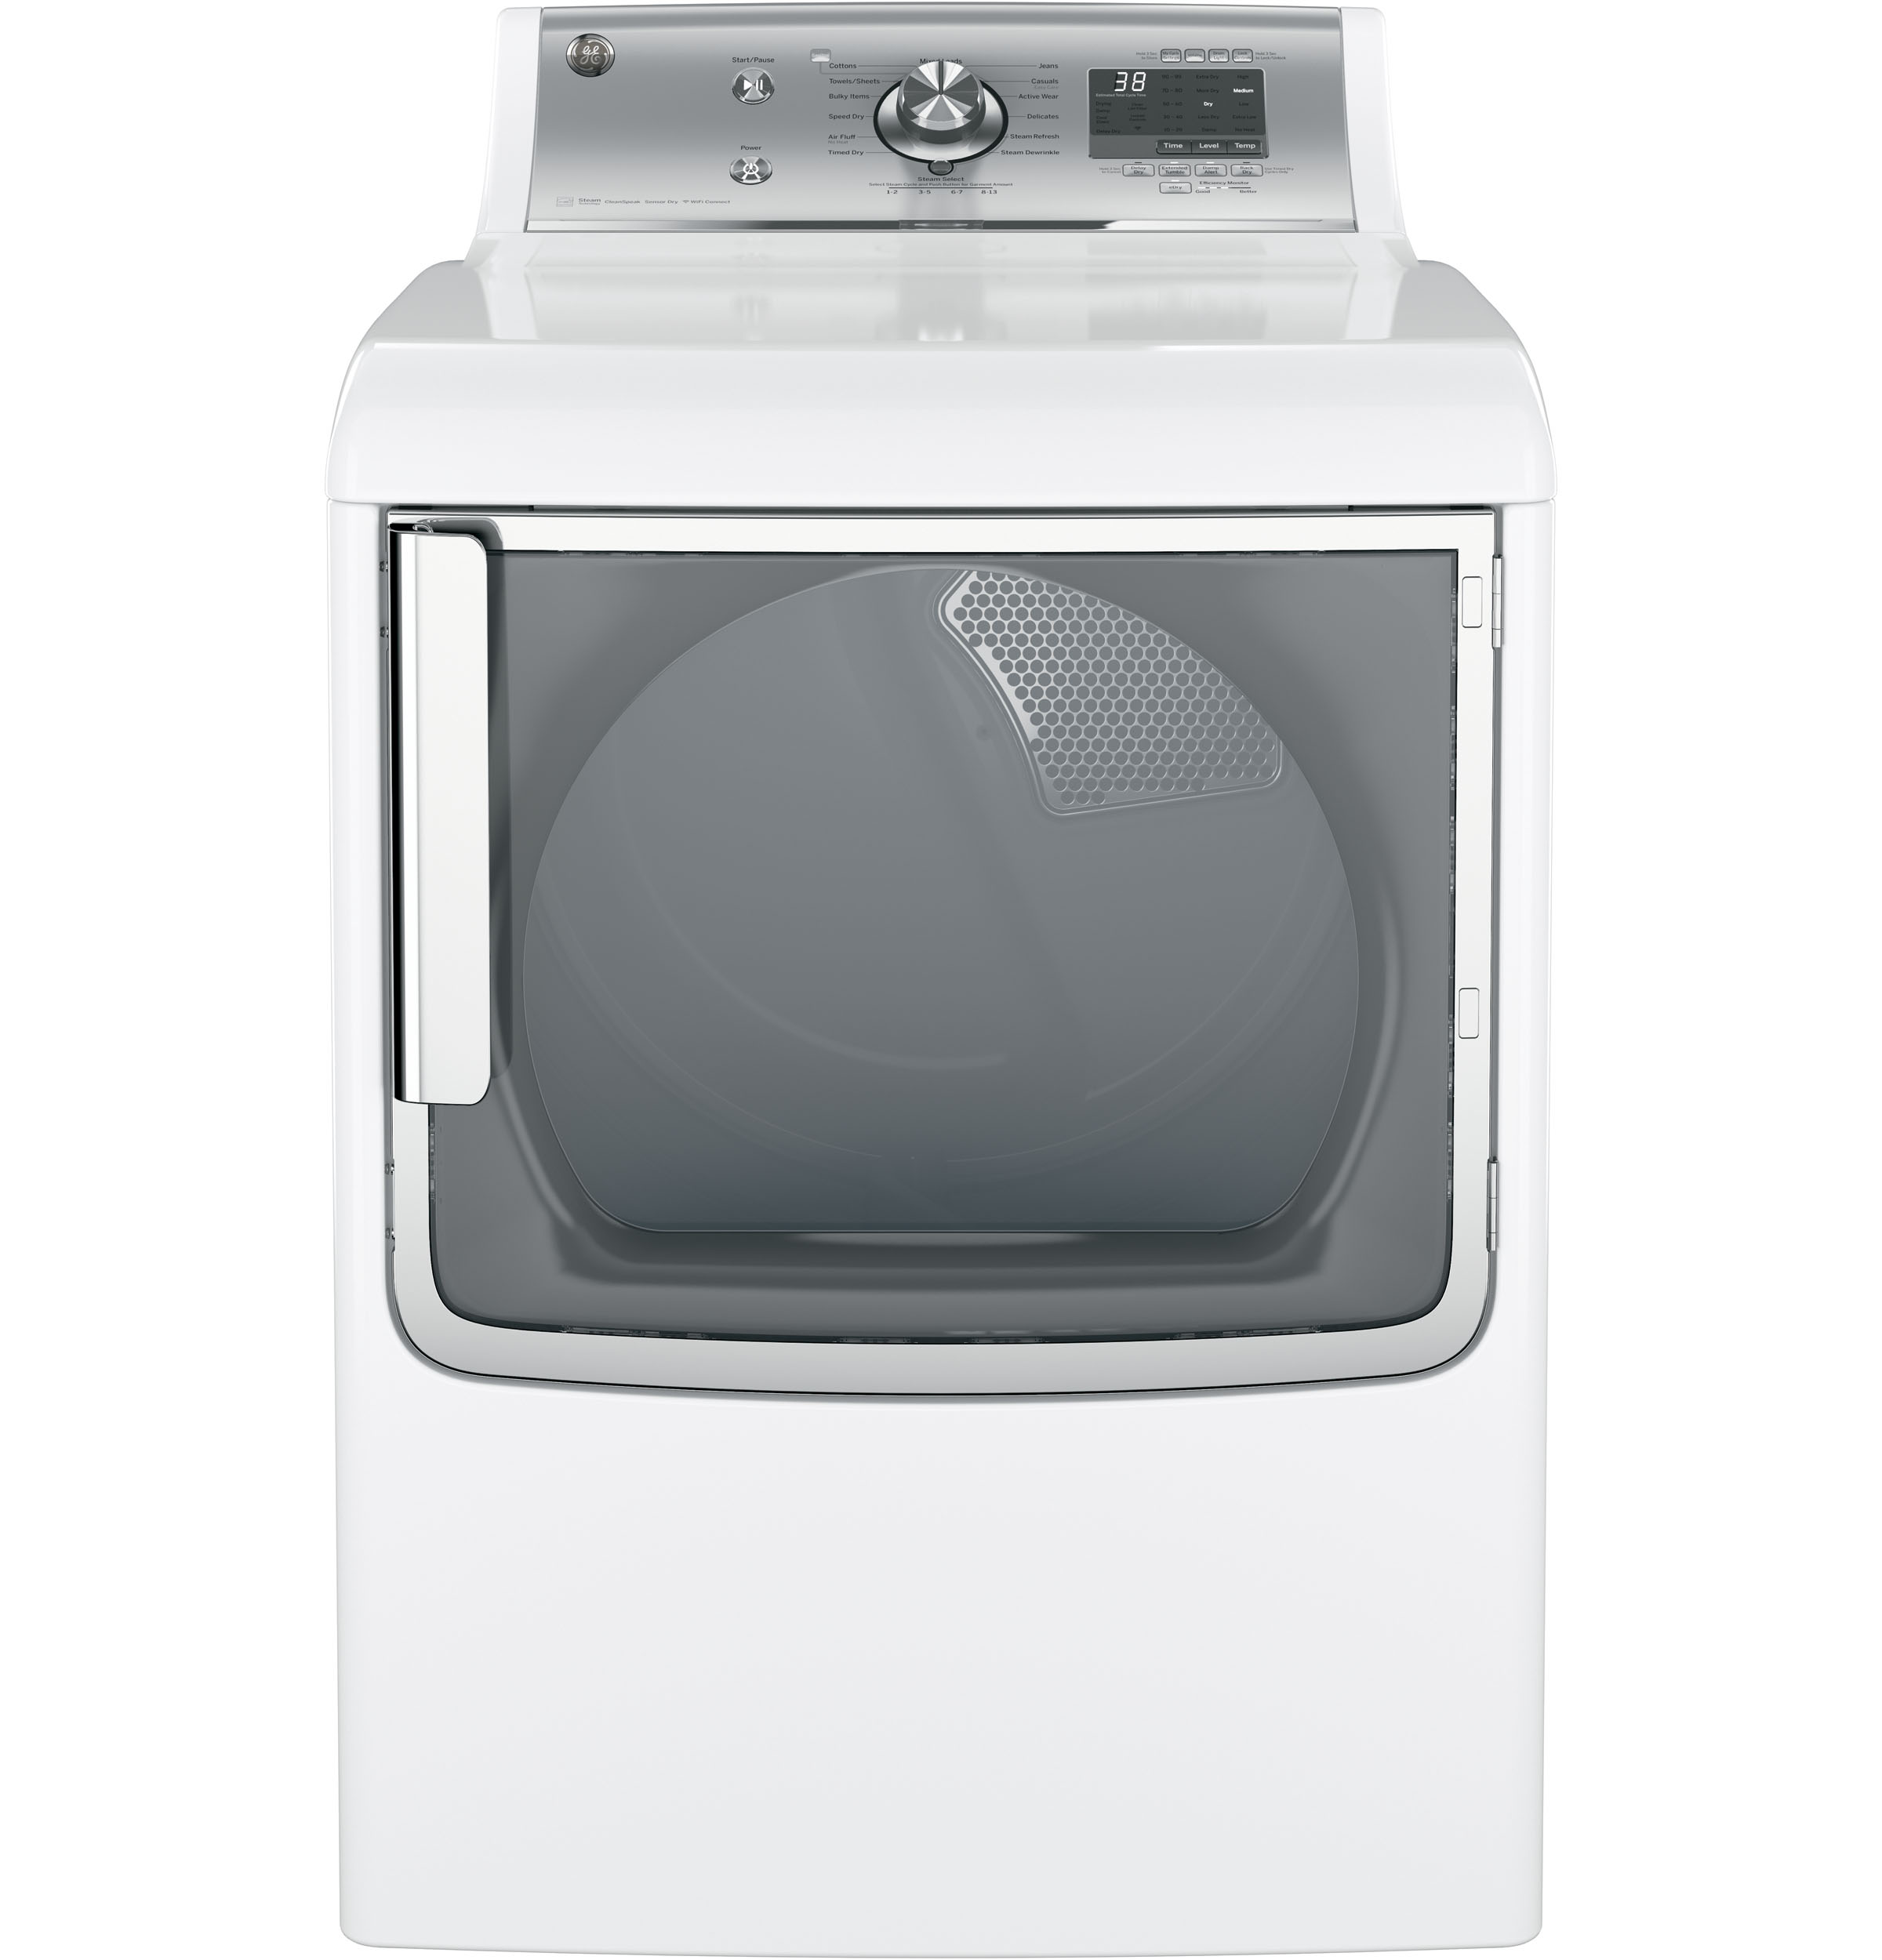 GE® 7.8 cu. ft. capacity electric dryer with stainless steel drum and steam